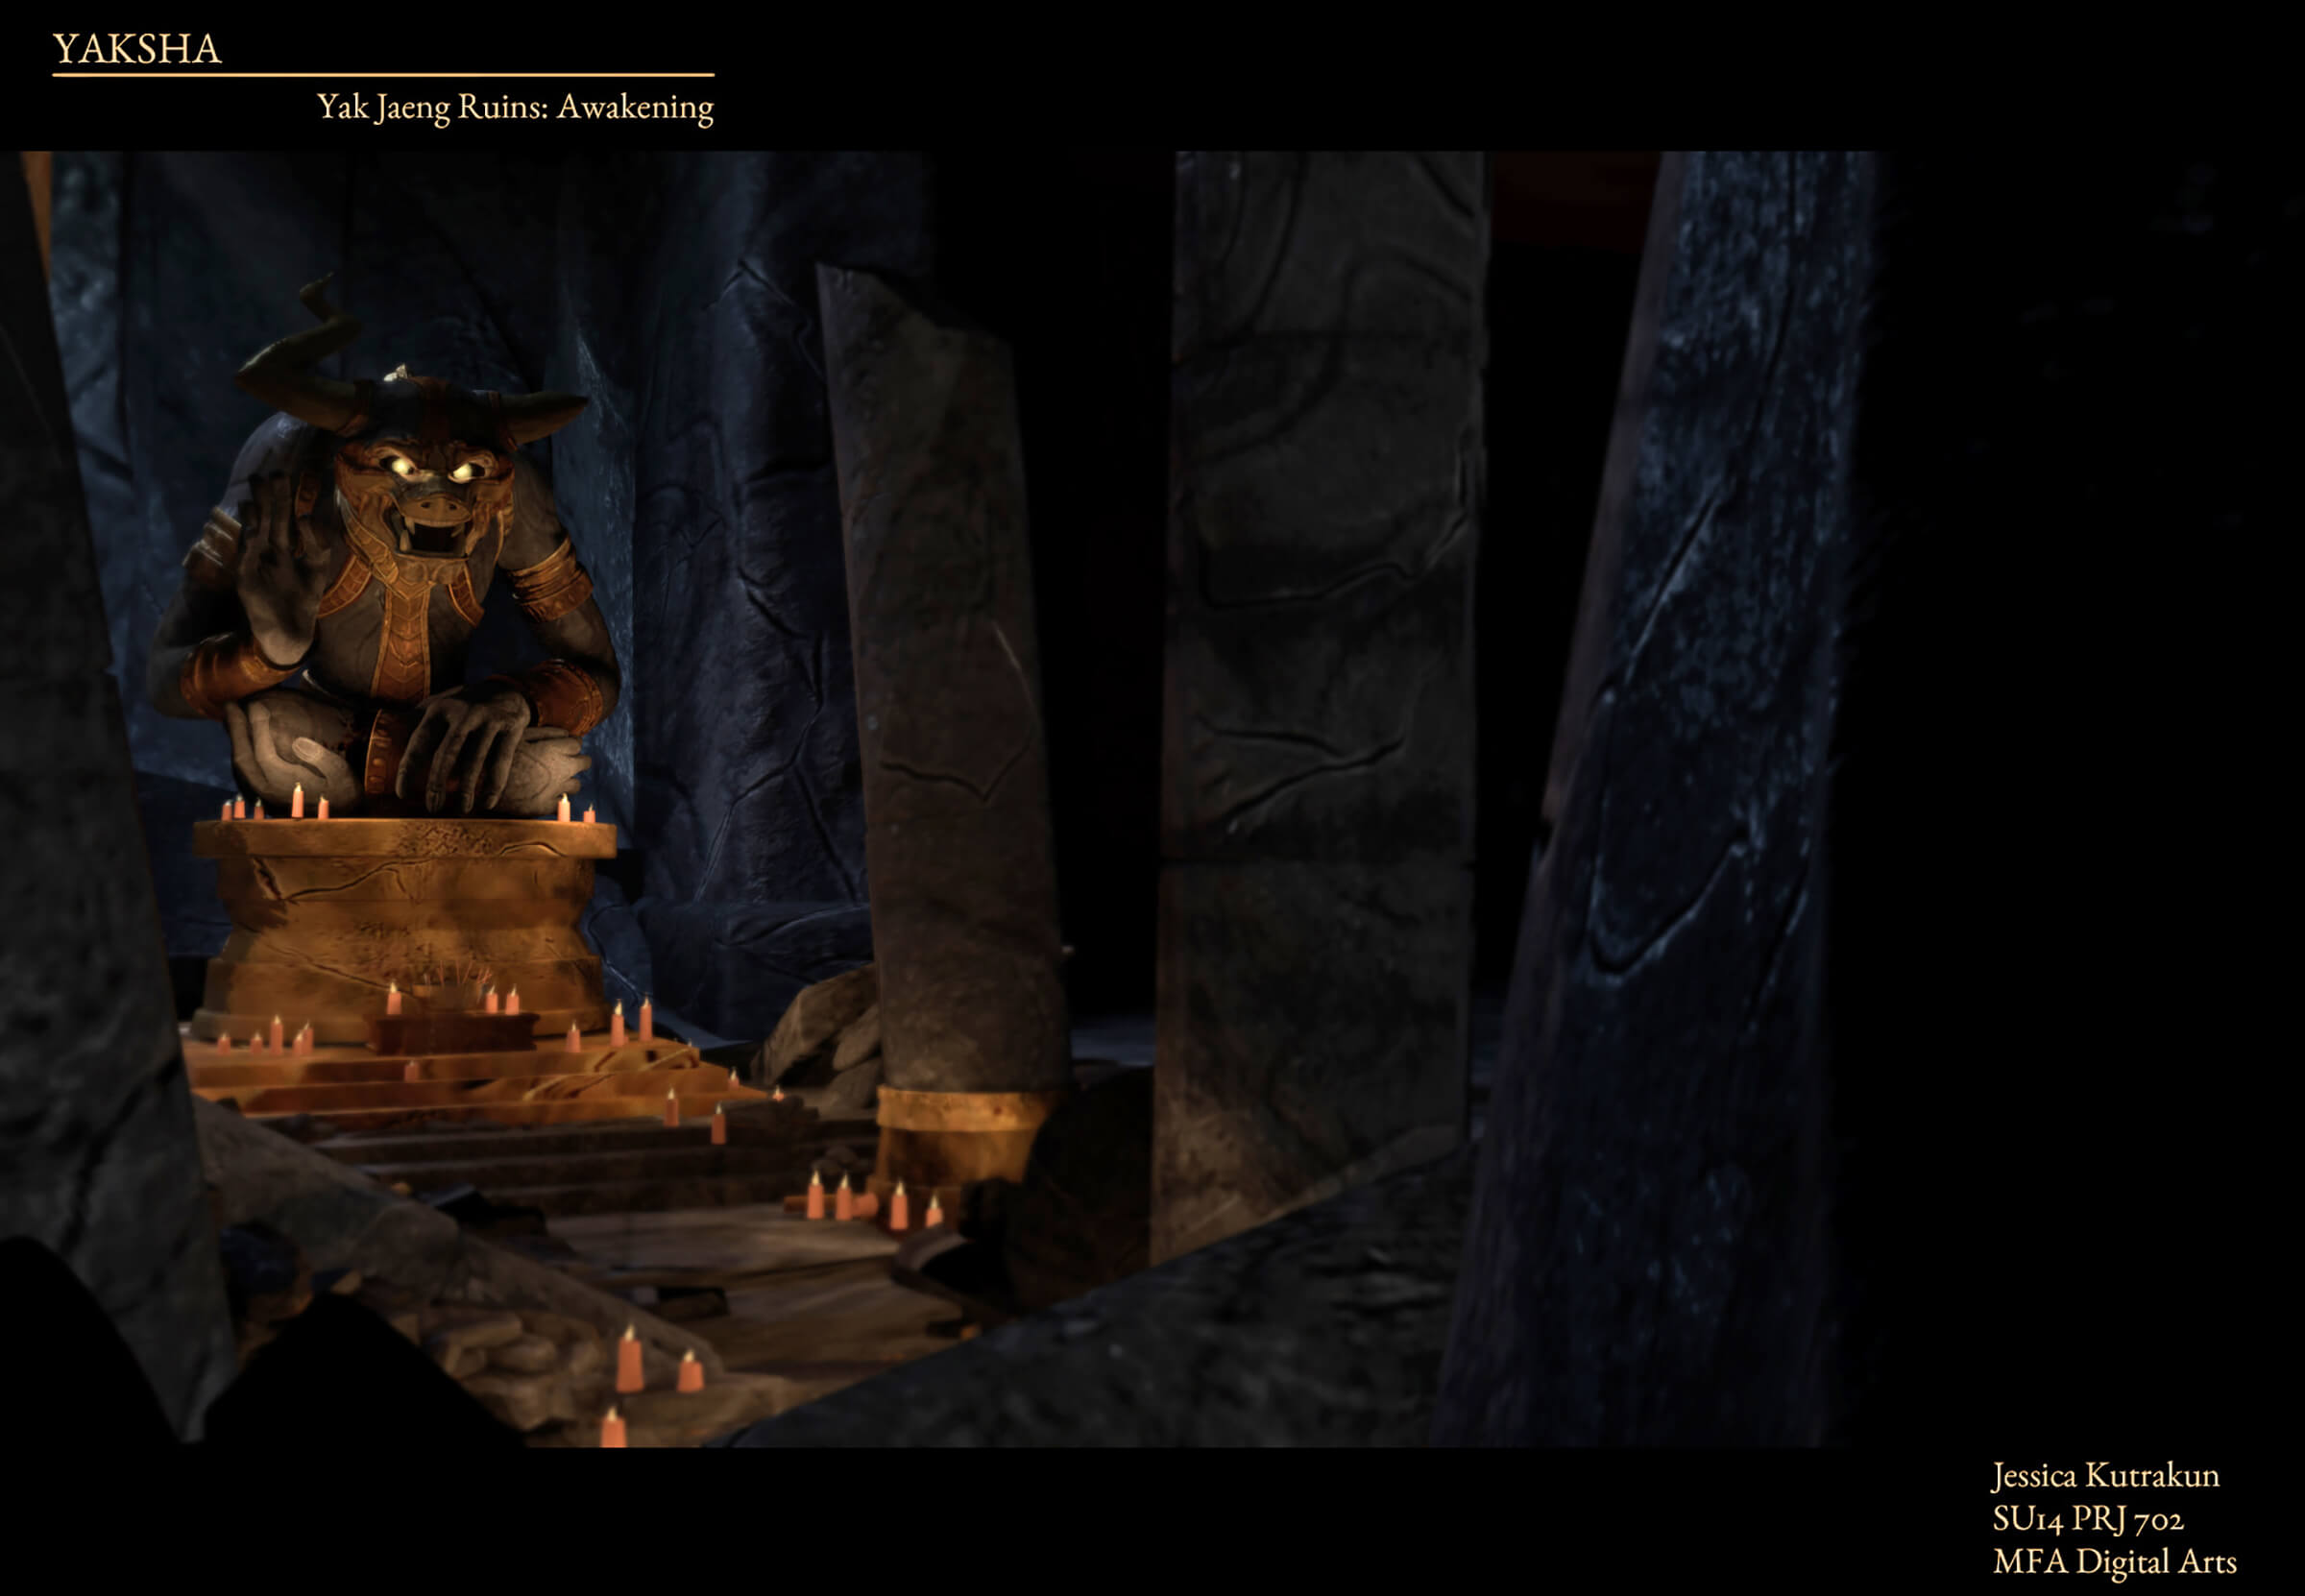 computer-generated 3D model of a creature with glowing eyes atop a pedestal in a cave strewn with lit candles